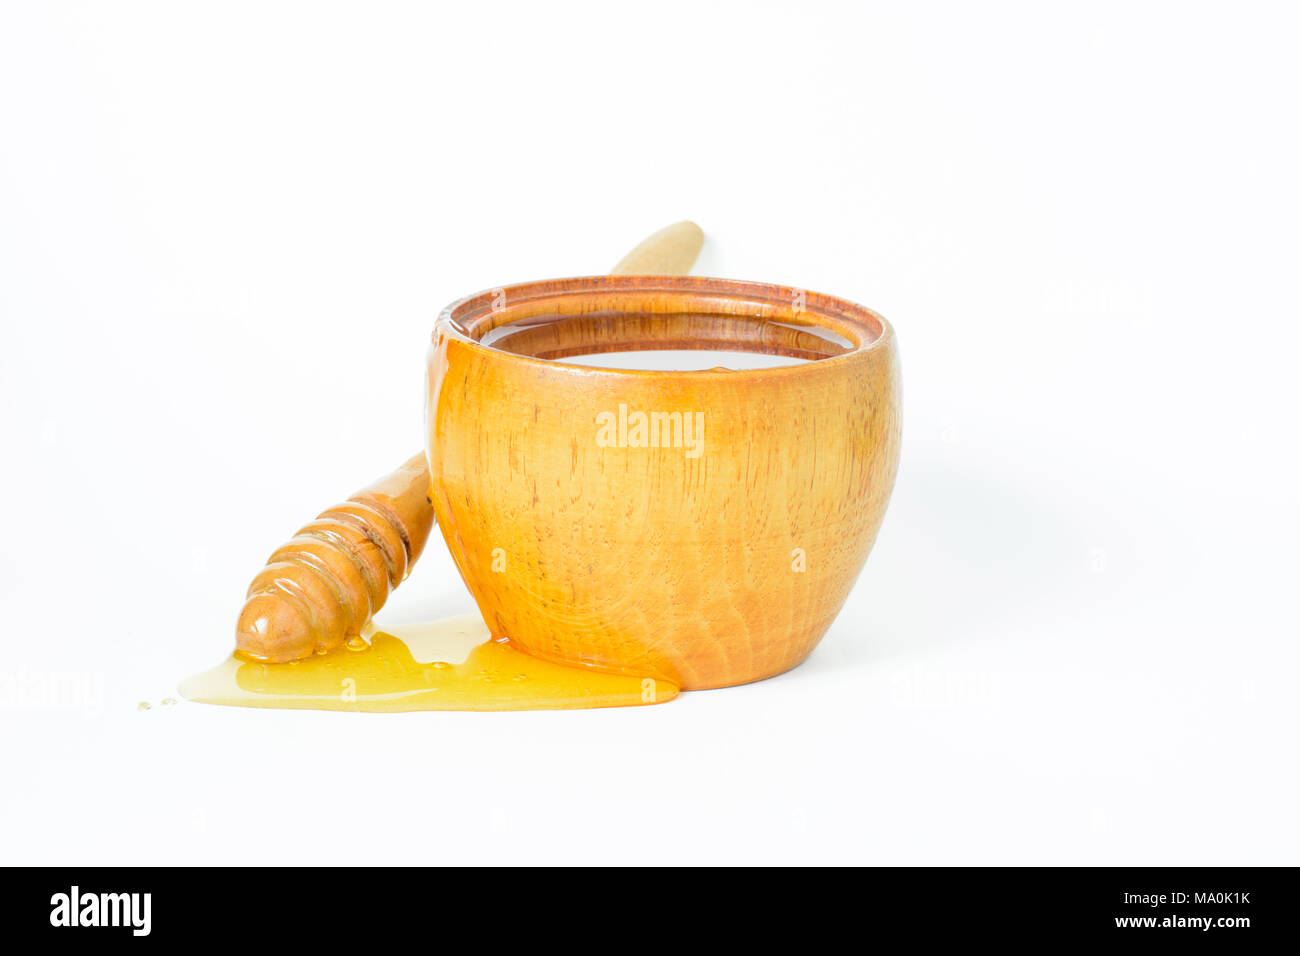 Honey in a wooden bowl and a honey dipper. Stock Photo